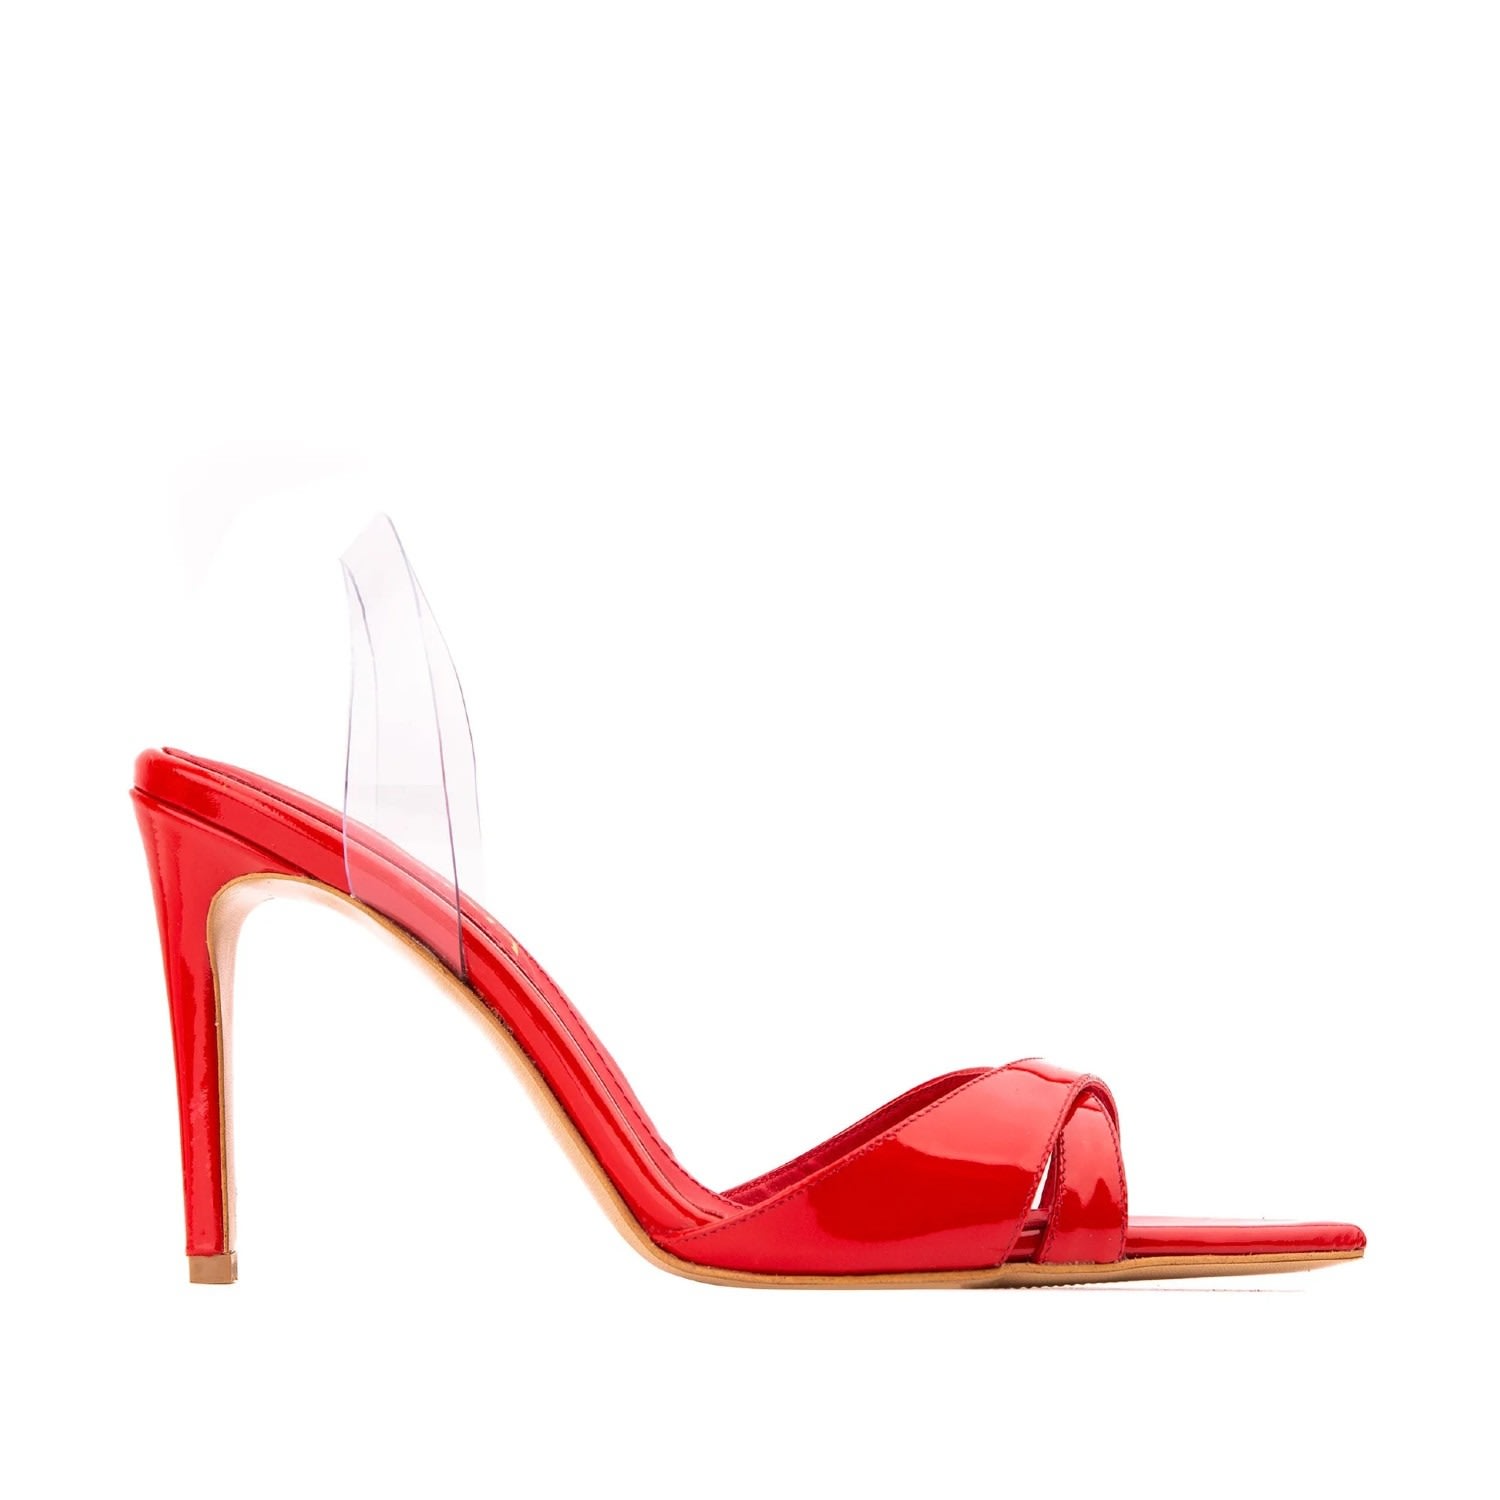 Shop Ginissima Women's Thea Bloody Red Patent Leather Sandals